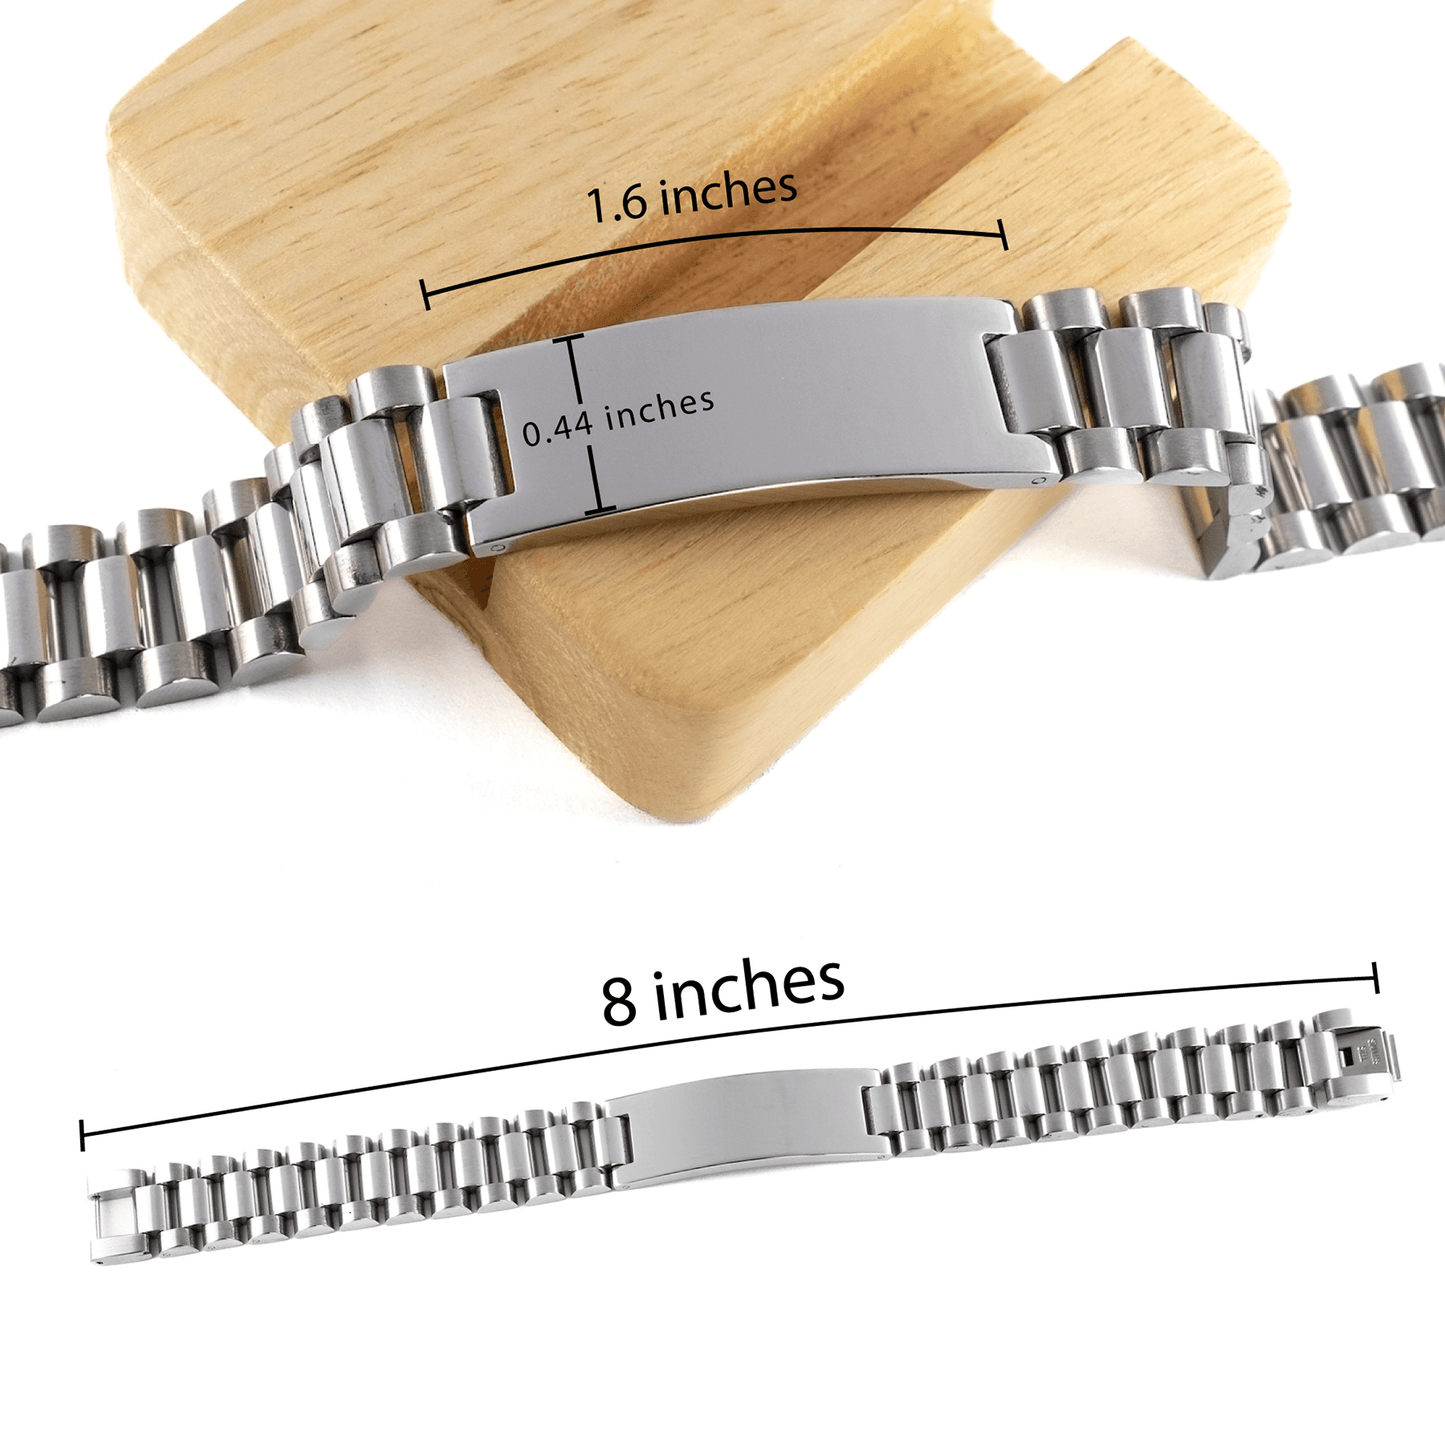 PE Teacher Ladder Stainless Steel Engraved Bracelet - Thanks for being who you are - Birthday Christmas Jewelry Gifts Coworkers Colleague Boss - Mallard Moon Gift Shop